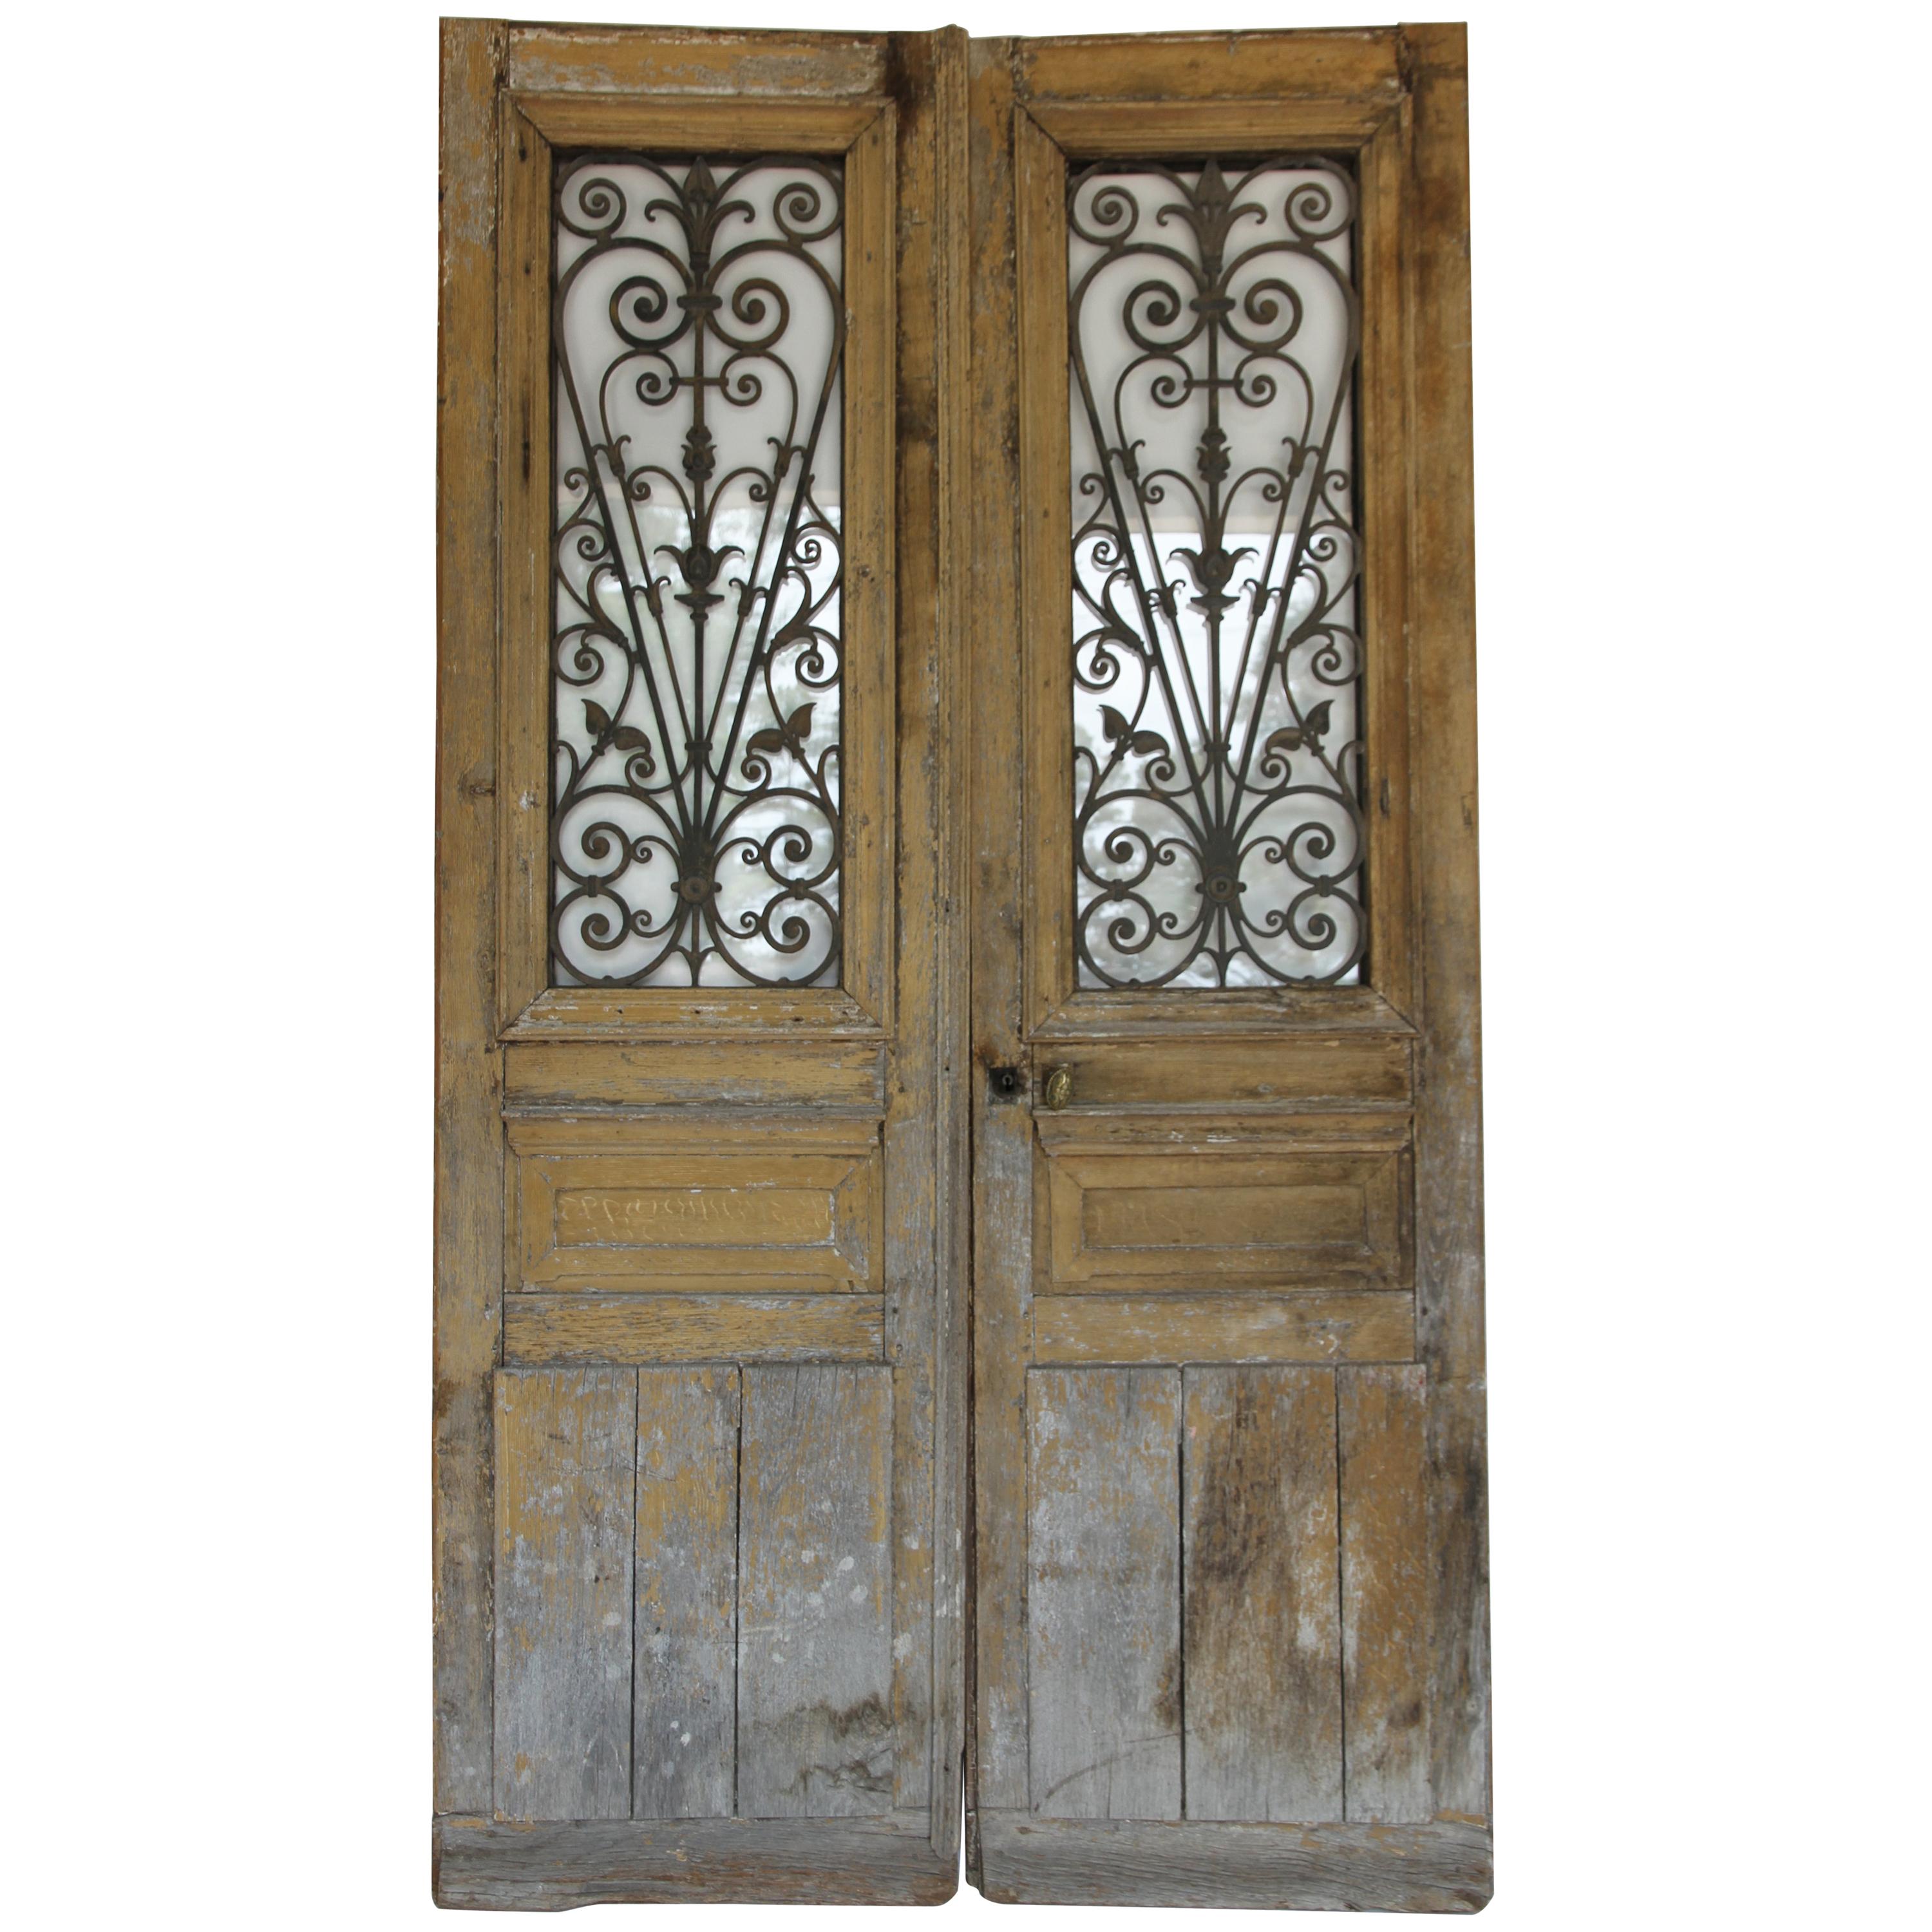 Antique French Doors with Iron and Glass Panels